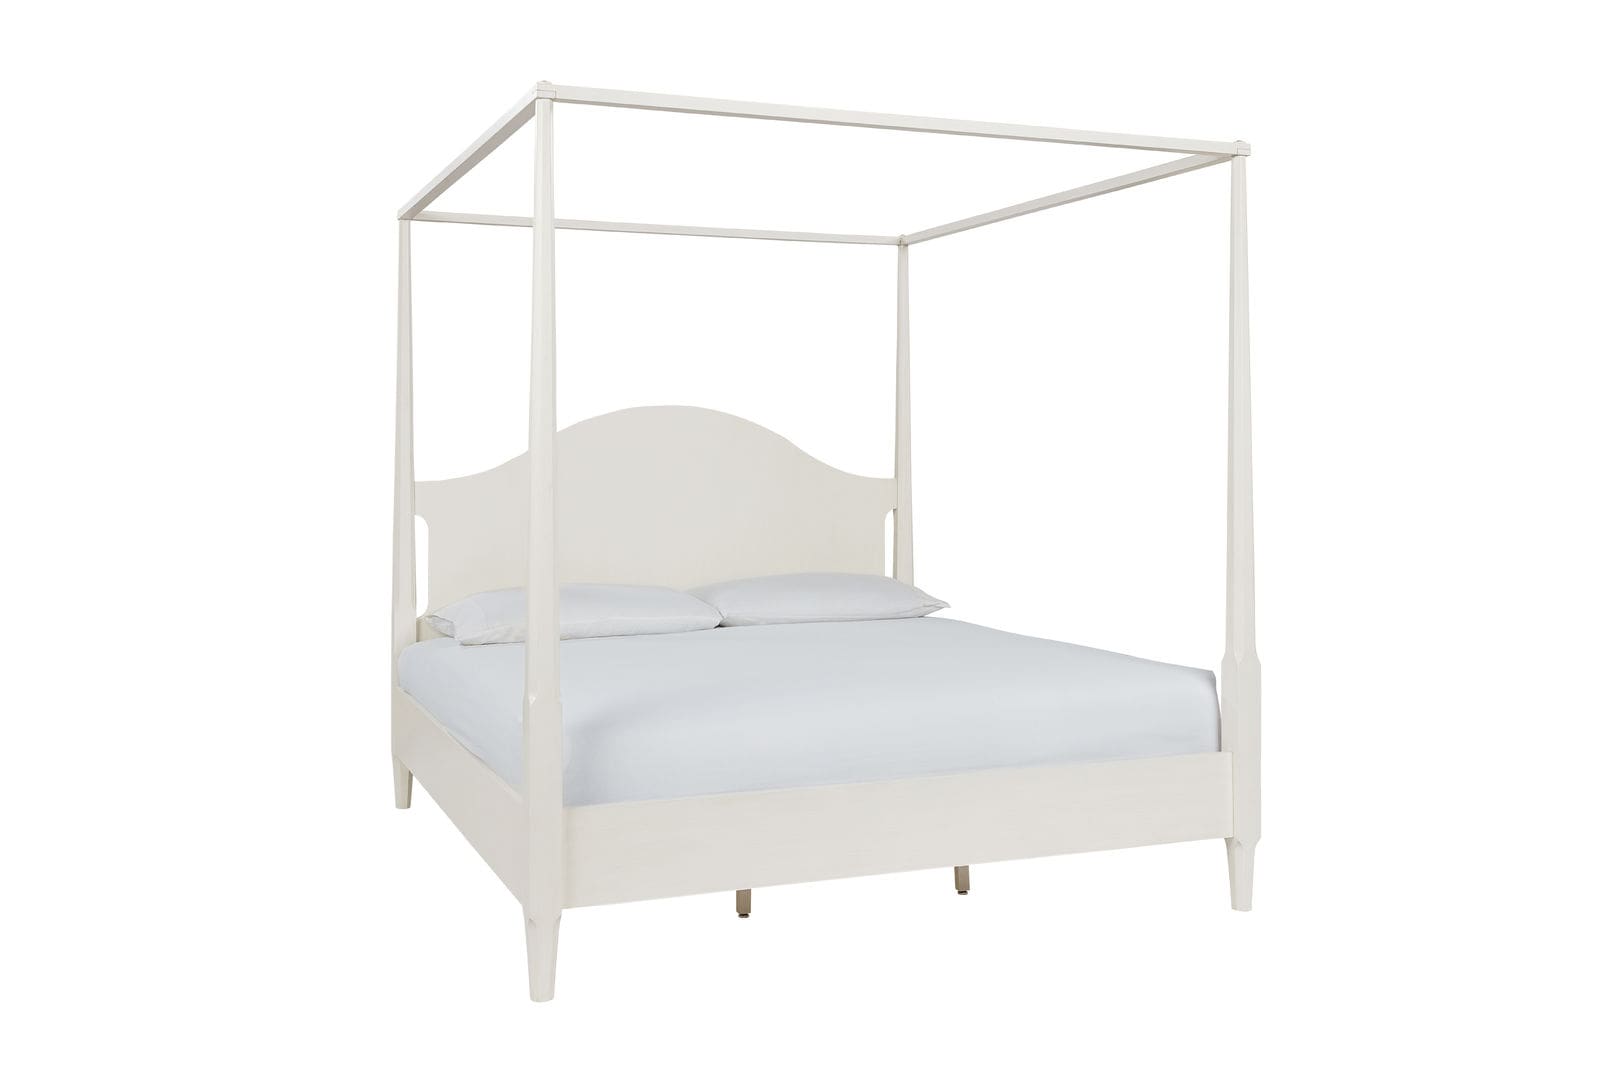 A crisp white bed with an open-air canopy, the Boca Grande Key Bed is a stunning contemporary bedroom furniture centerpiece. Available at Charleston furniture store GDC.